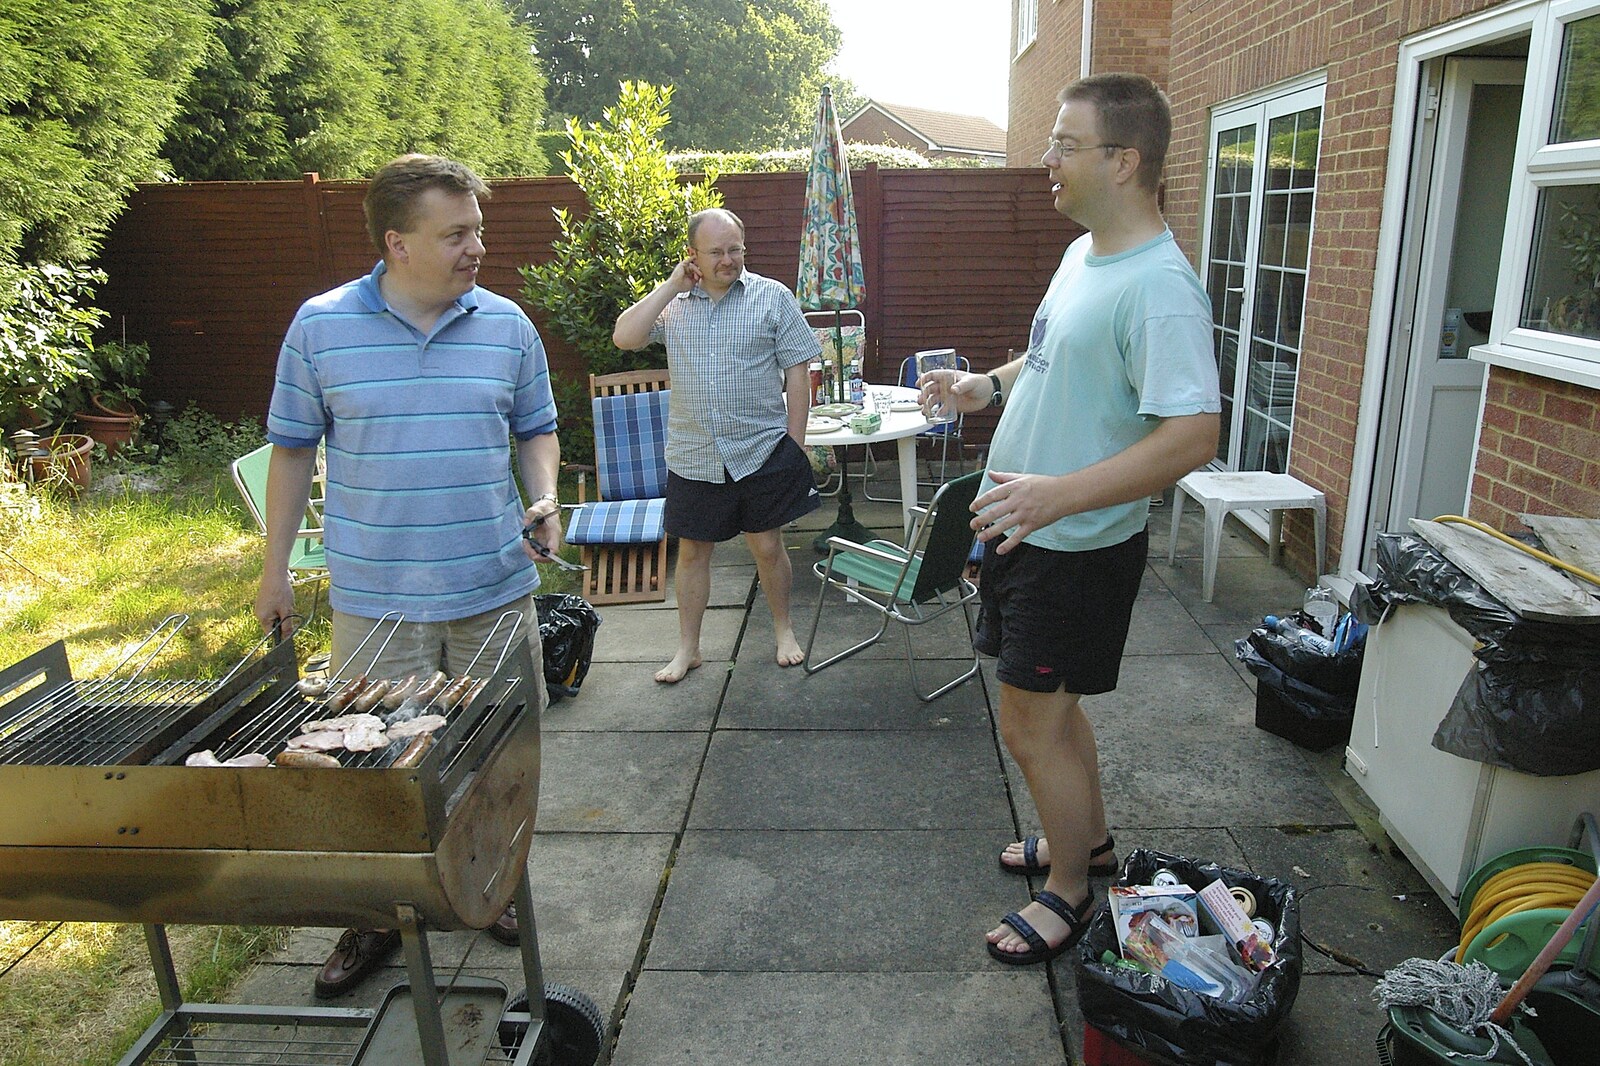 Simon's mate's on sausage duty from Simon's Birthday Barbeque, Reading, Berkshire - 30th June 2006